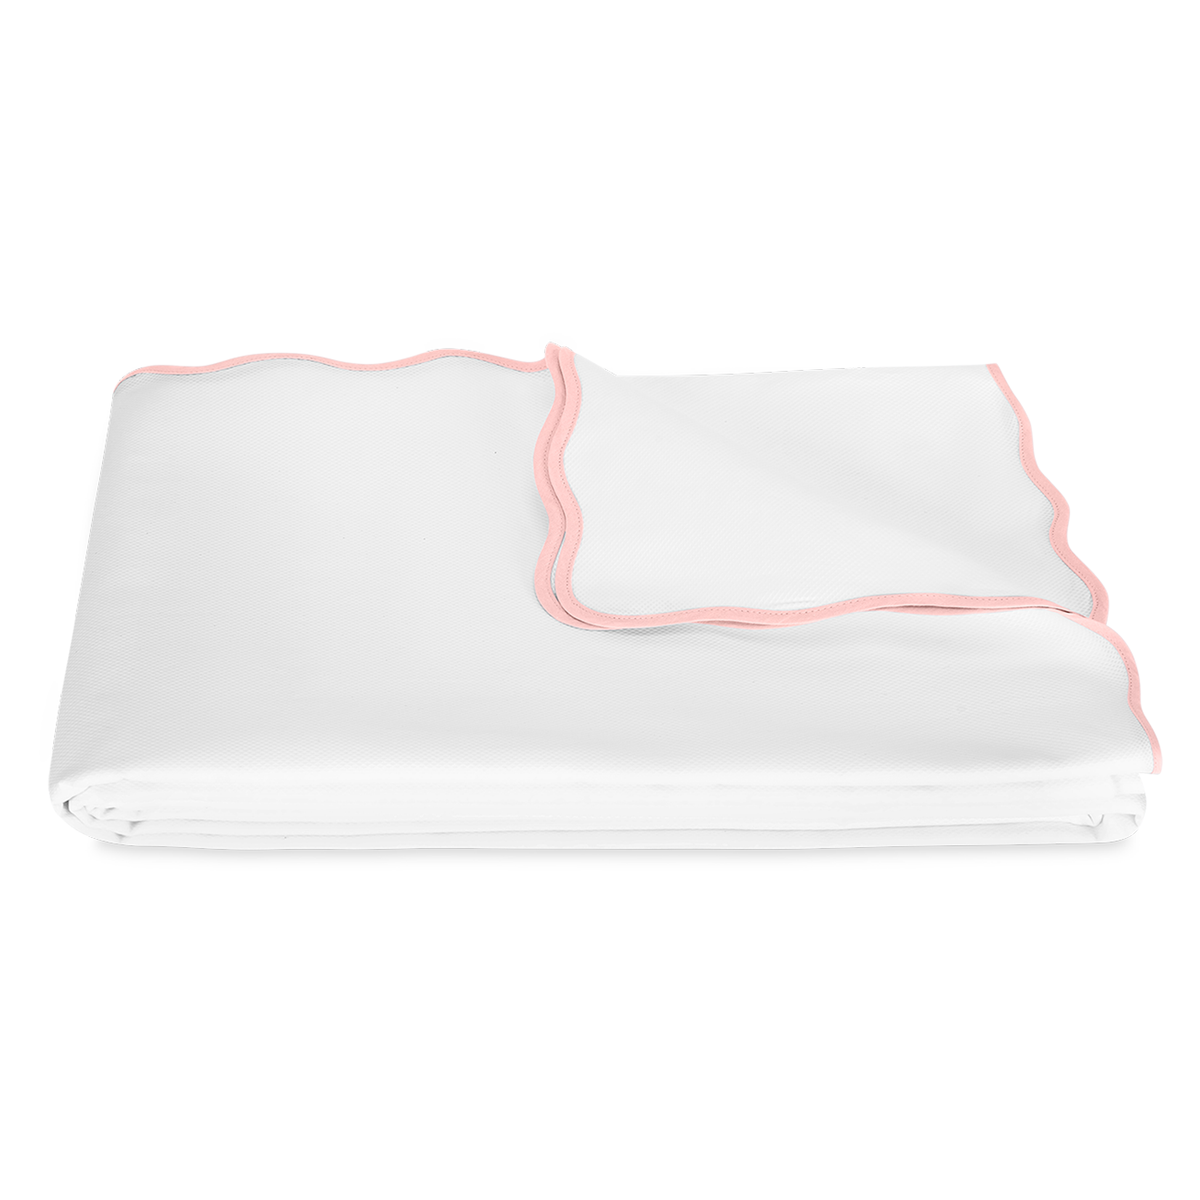 Folded Coverlet of Matouk Camilla Pique Bedding in Color Pink